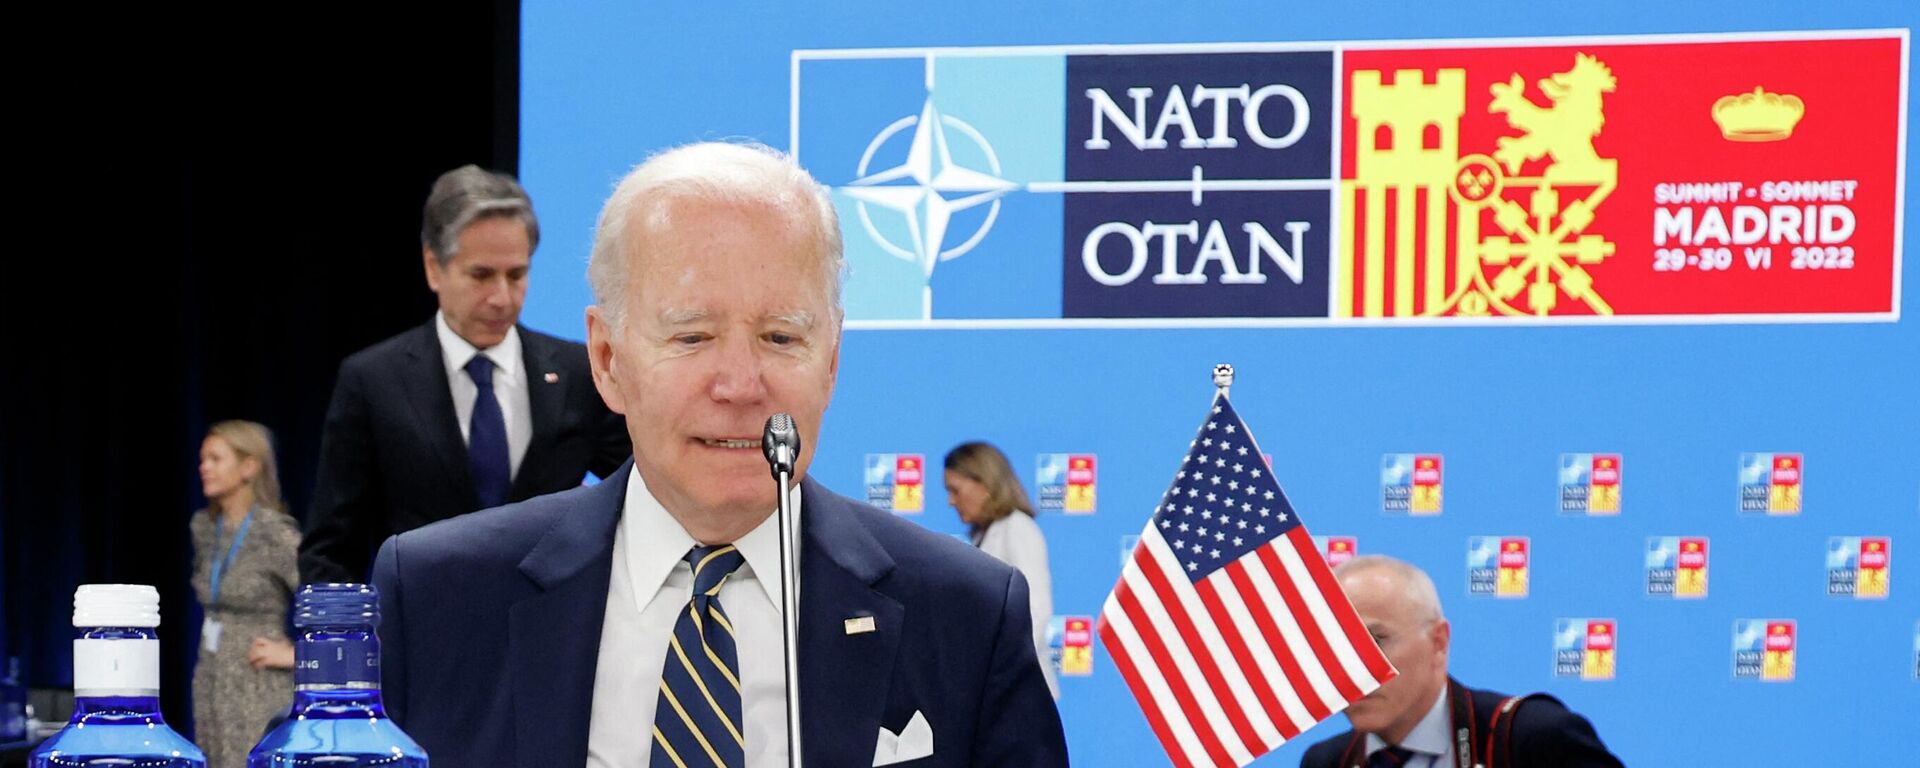 U.S. President Joe Biden looks on as he attends a meeting of The North Atlantic Council during the NATO summit at the Ifema congress centre in Madrid, on June 30, 2022. - Sputnik International, 1920, 30.06.2022